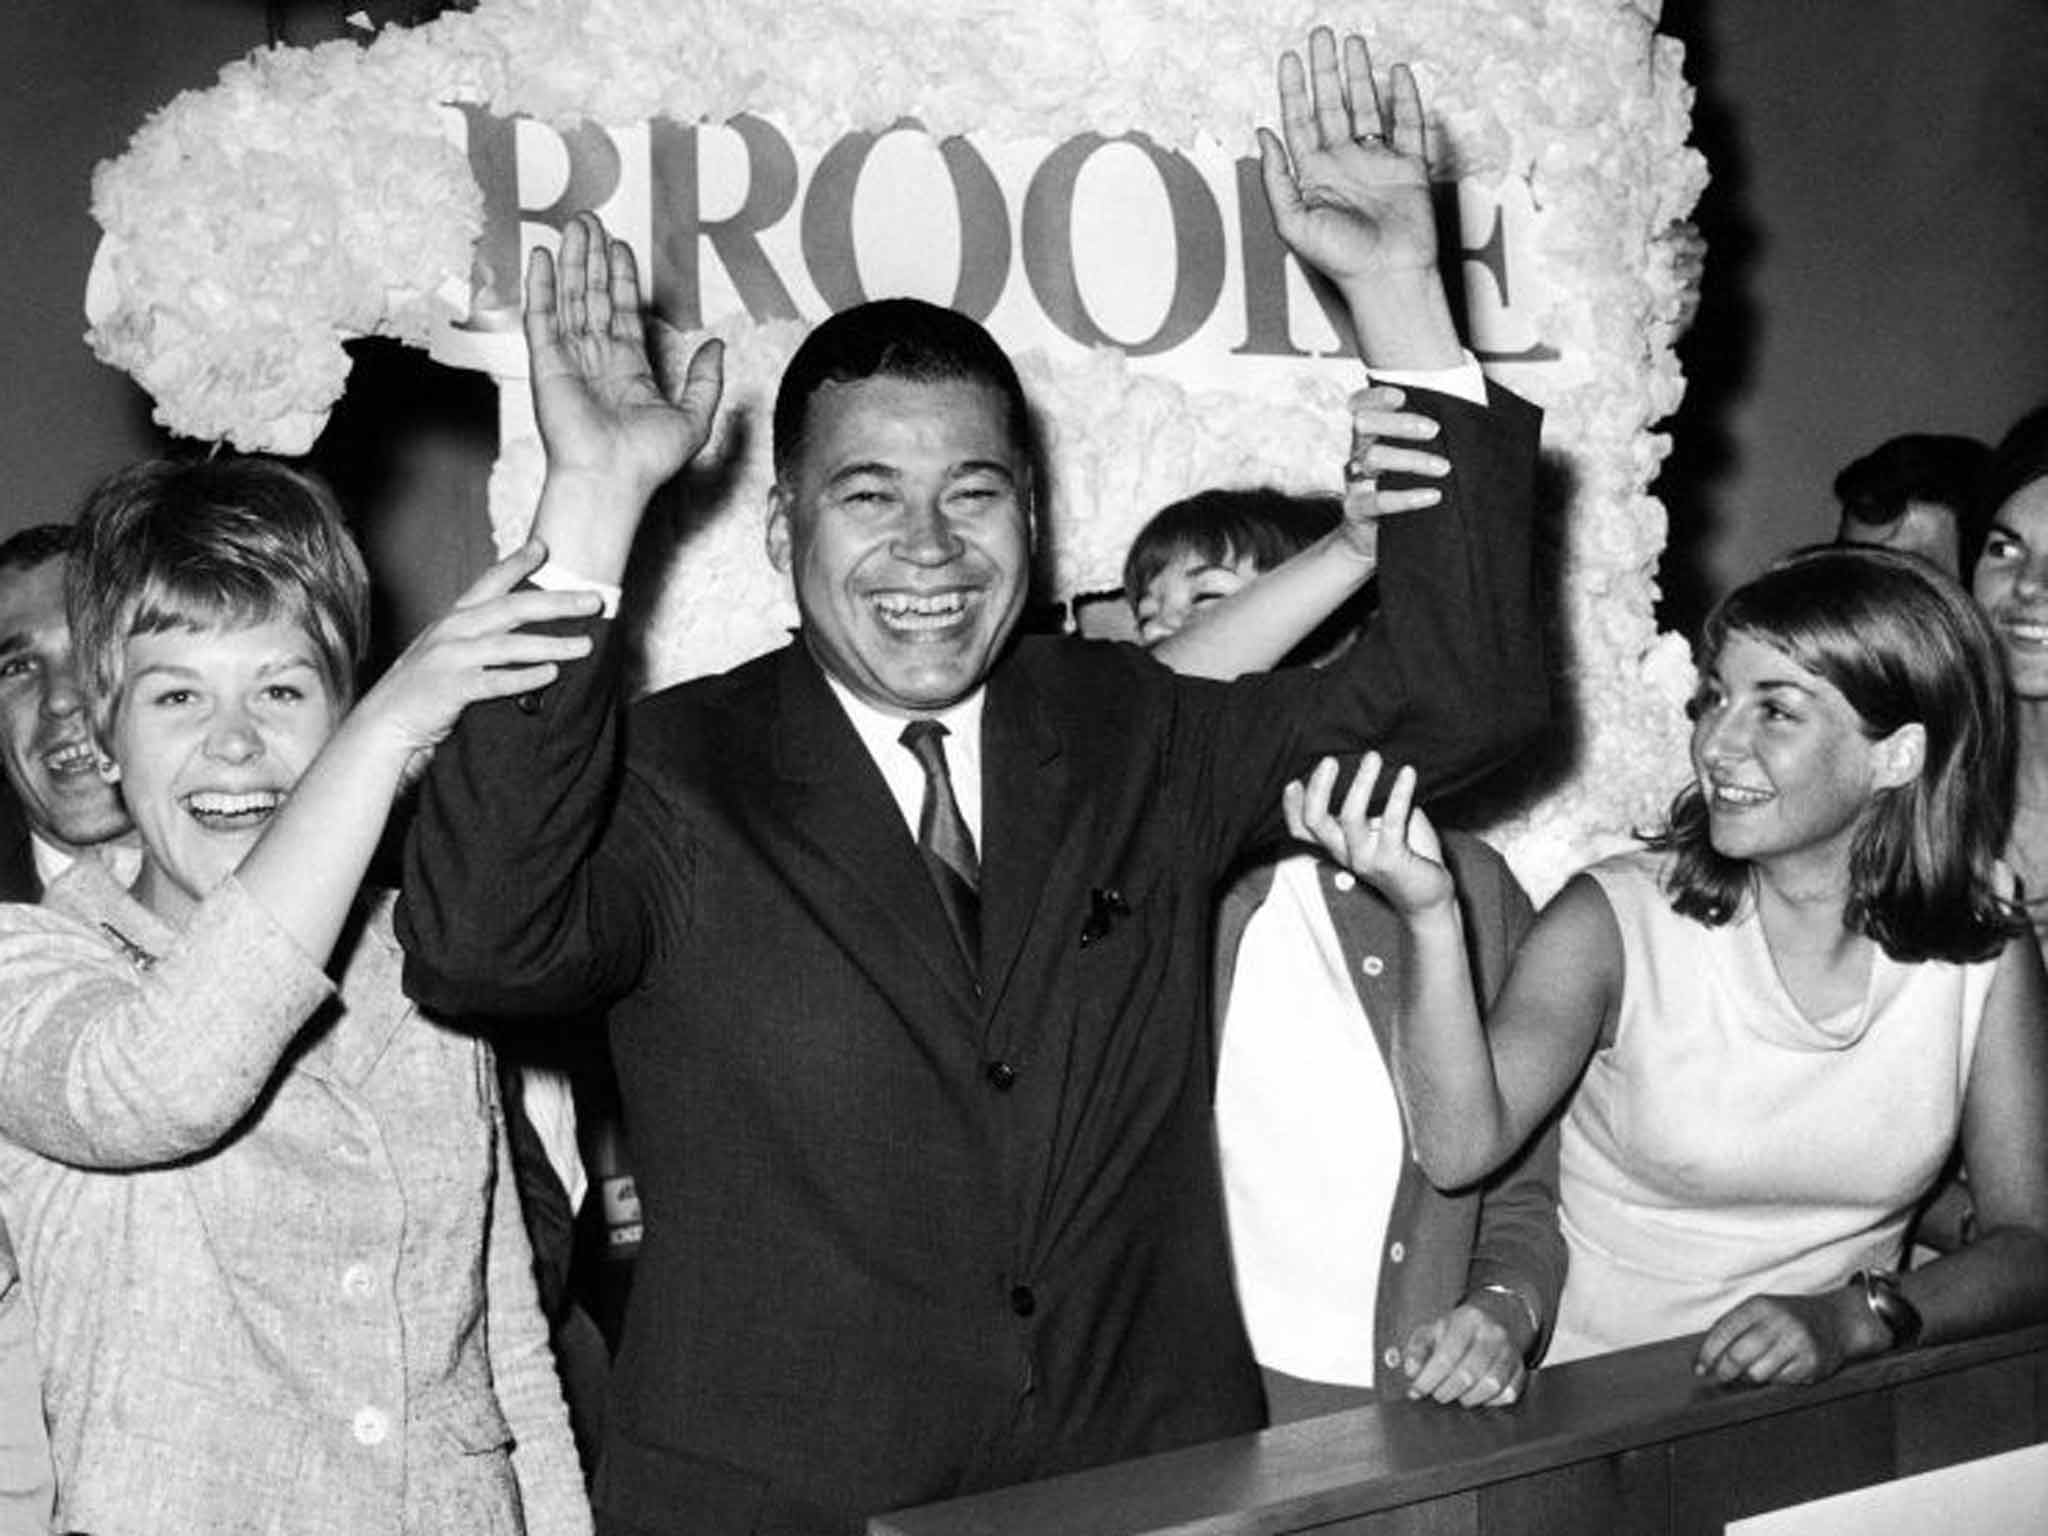 Brooke in 1966 after winning the Republican nomination for the US Senate; his charisma and vigour reminded many of JFK